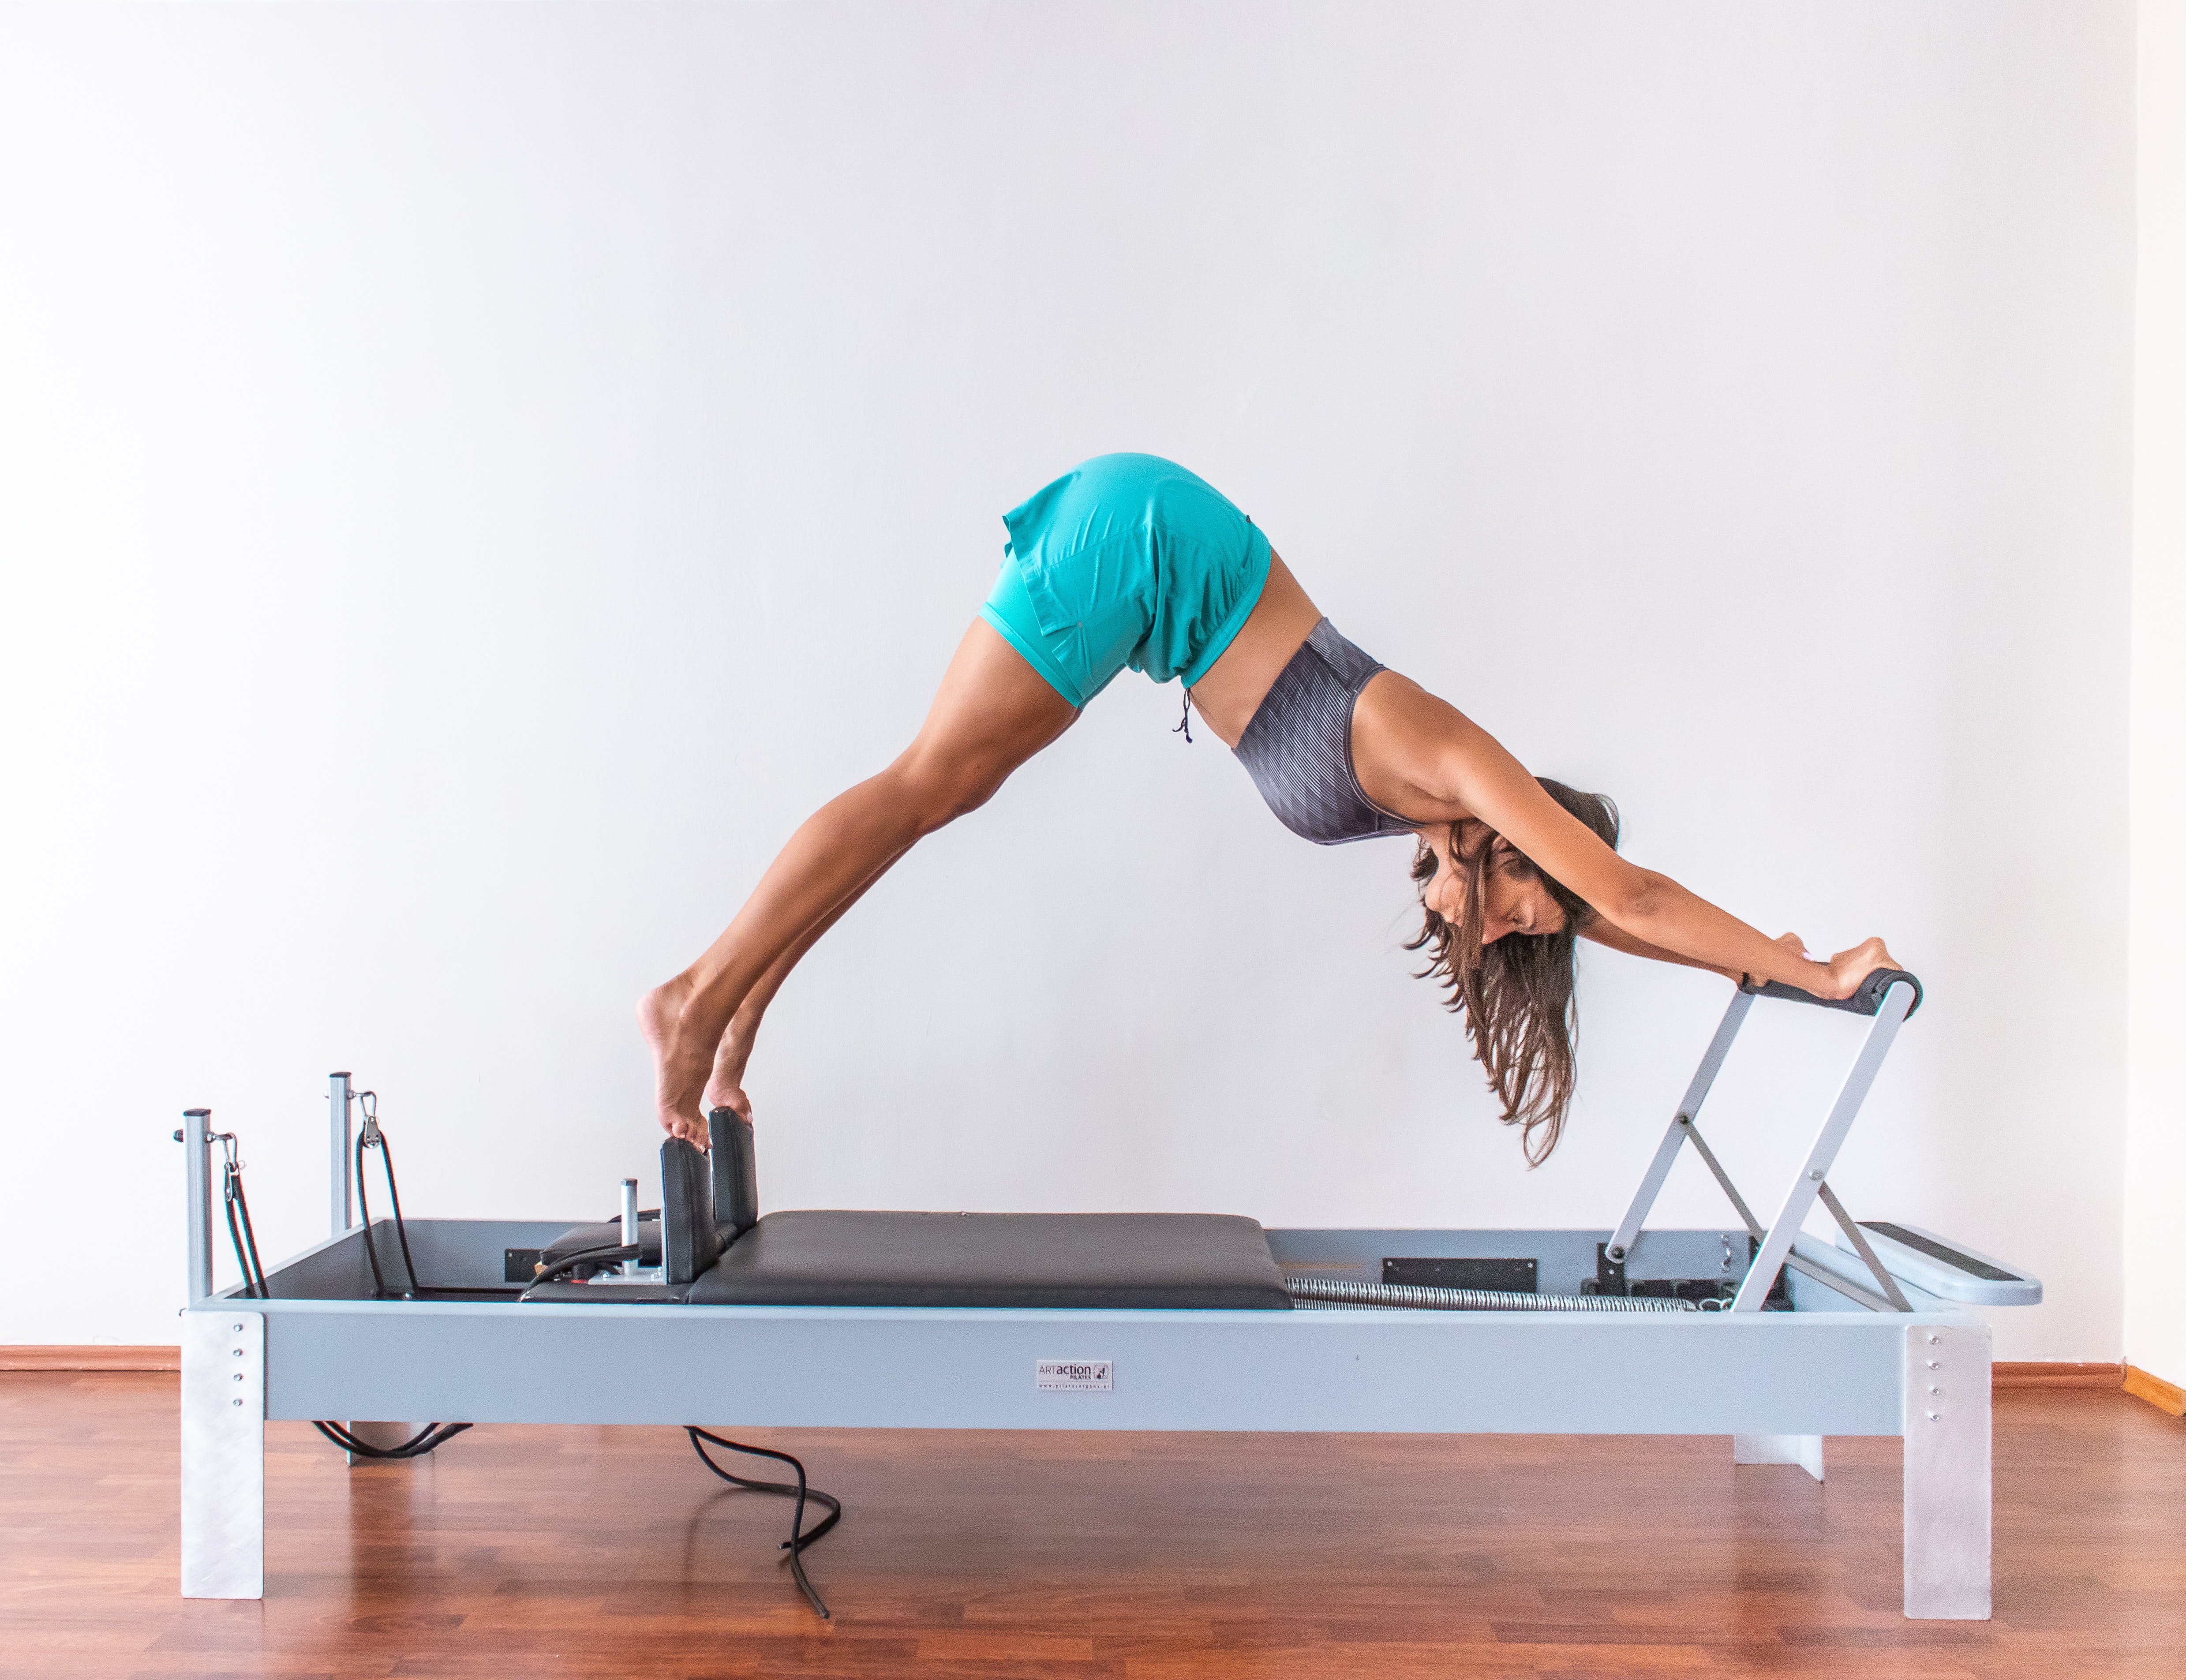 Pilates can require equipment, but it doesn’t need to